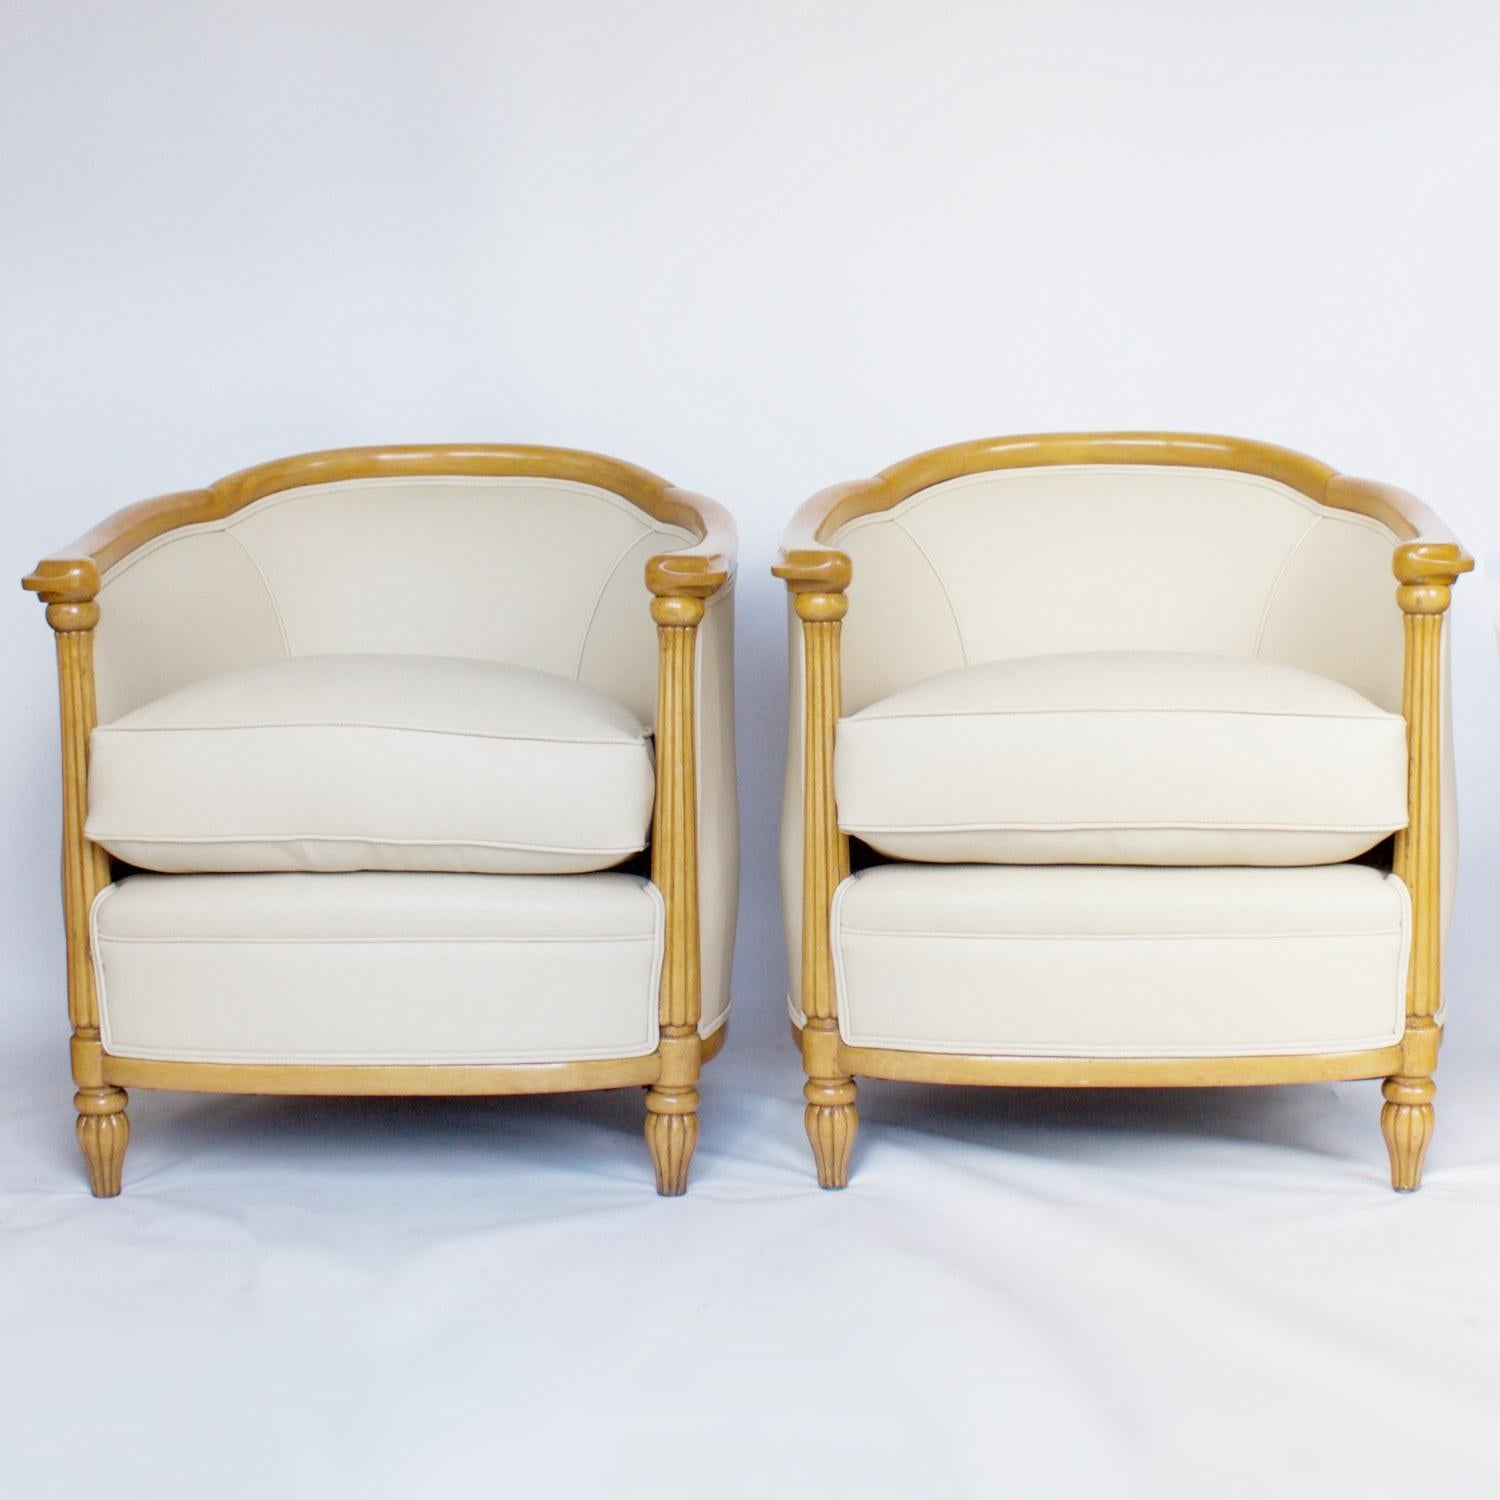 A pair of Art Deco tub chairs with reeded front column legs and curved frame with carved hand rest detail. Solid beech wood, upholstered in cream leather. 

Dimensions: 76.5cm, W 69cm, D 63cm, seat H 47cm

Origin: English

Date: Circa